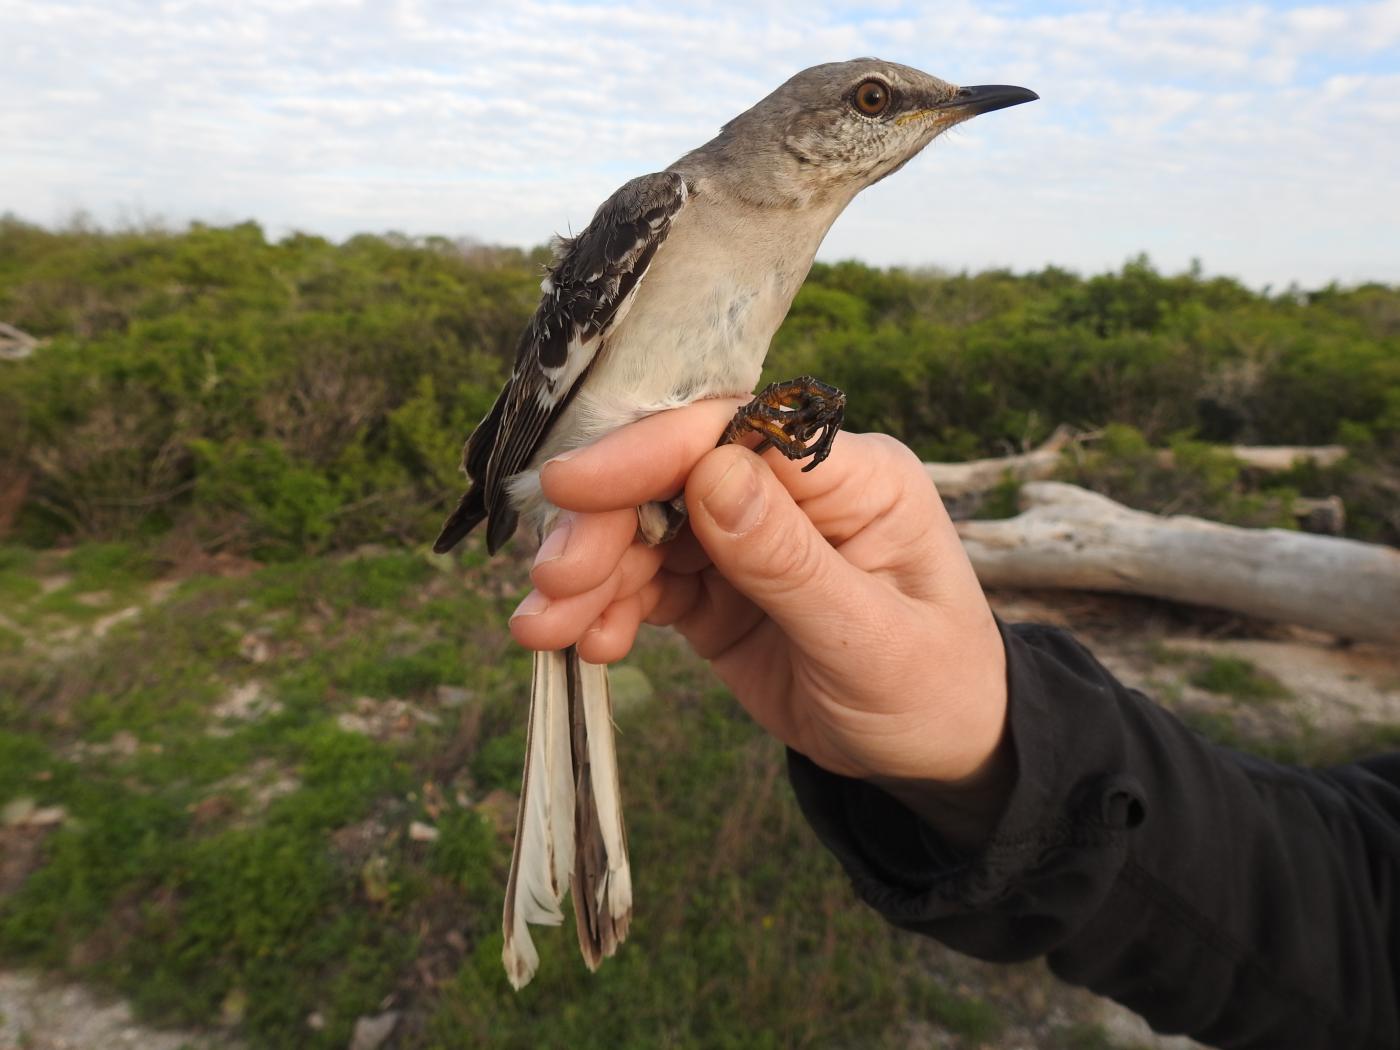 A medium-sized bird with light gray feathers and darker gray-brown wings, called a northern mockingbird, being held in a researcher's hand